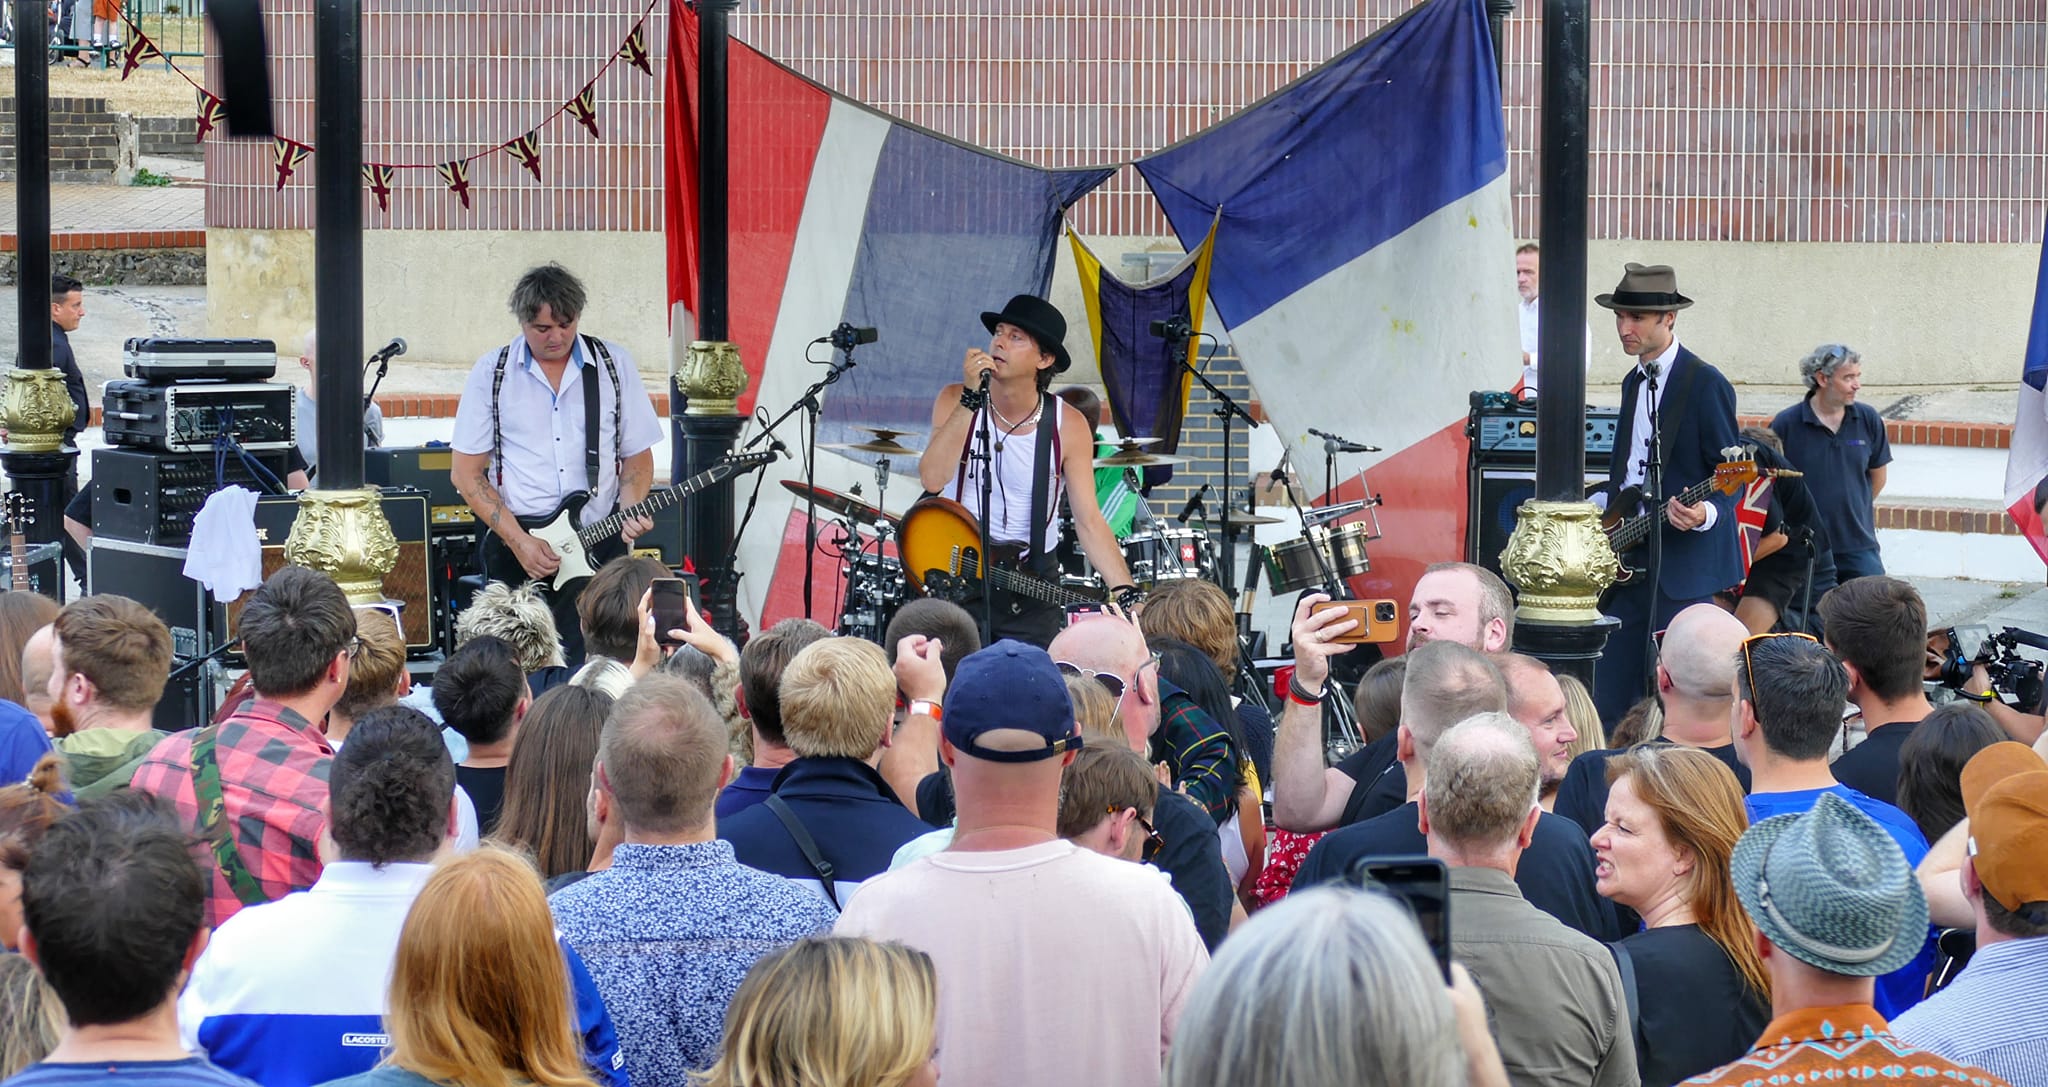 The Libertines performed surprise gig in Margate